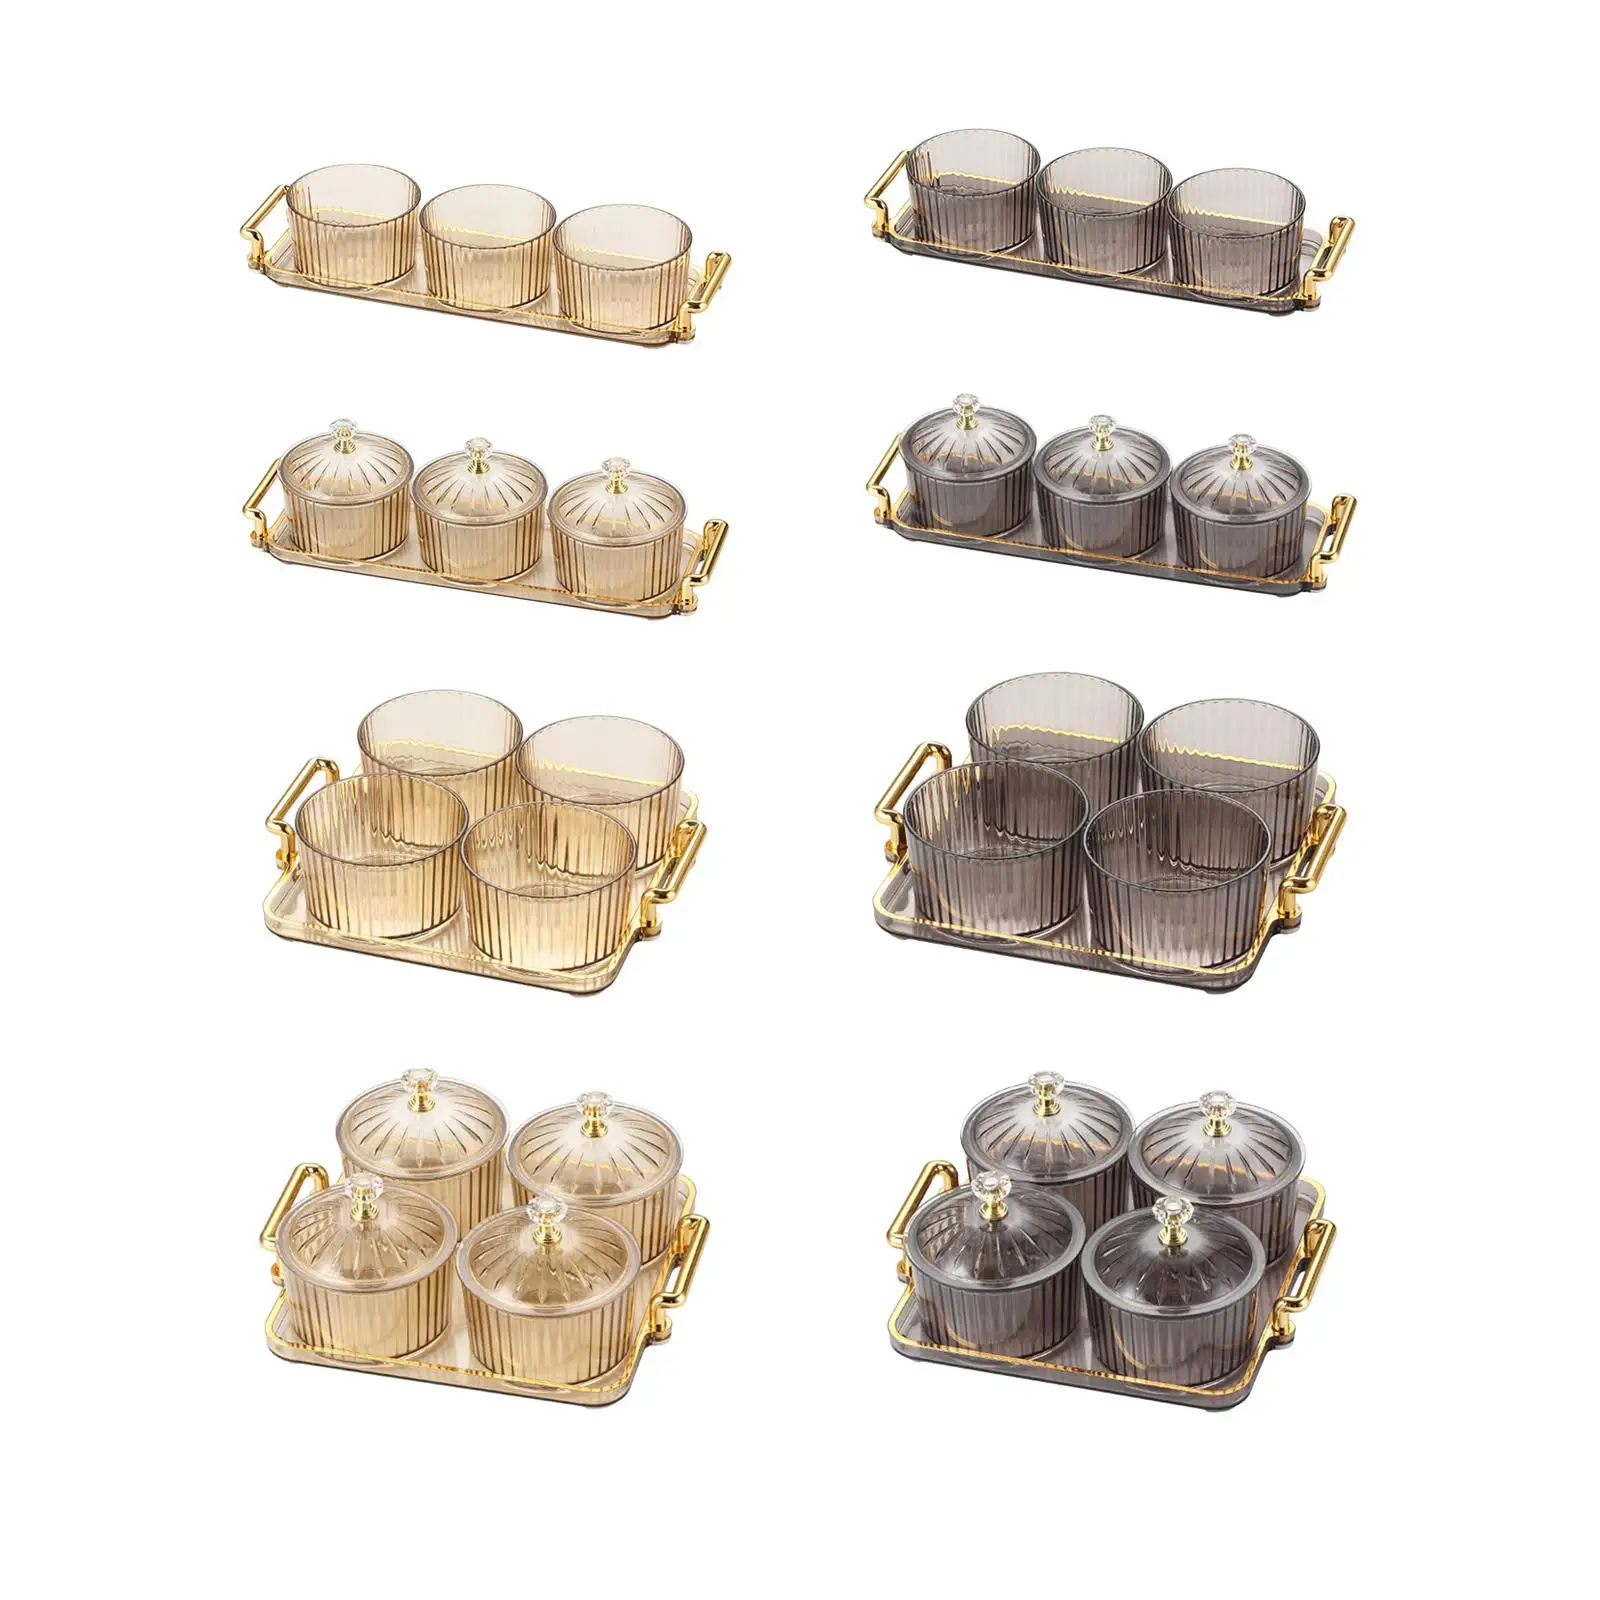 Divided Serving Platter Family Dinners and Holiday Parties Use Nuts Tray with Holder Small Serving Bowls Serving Dishes